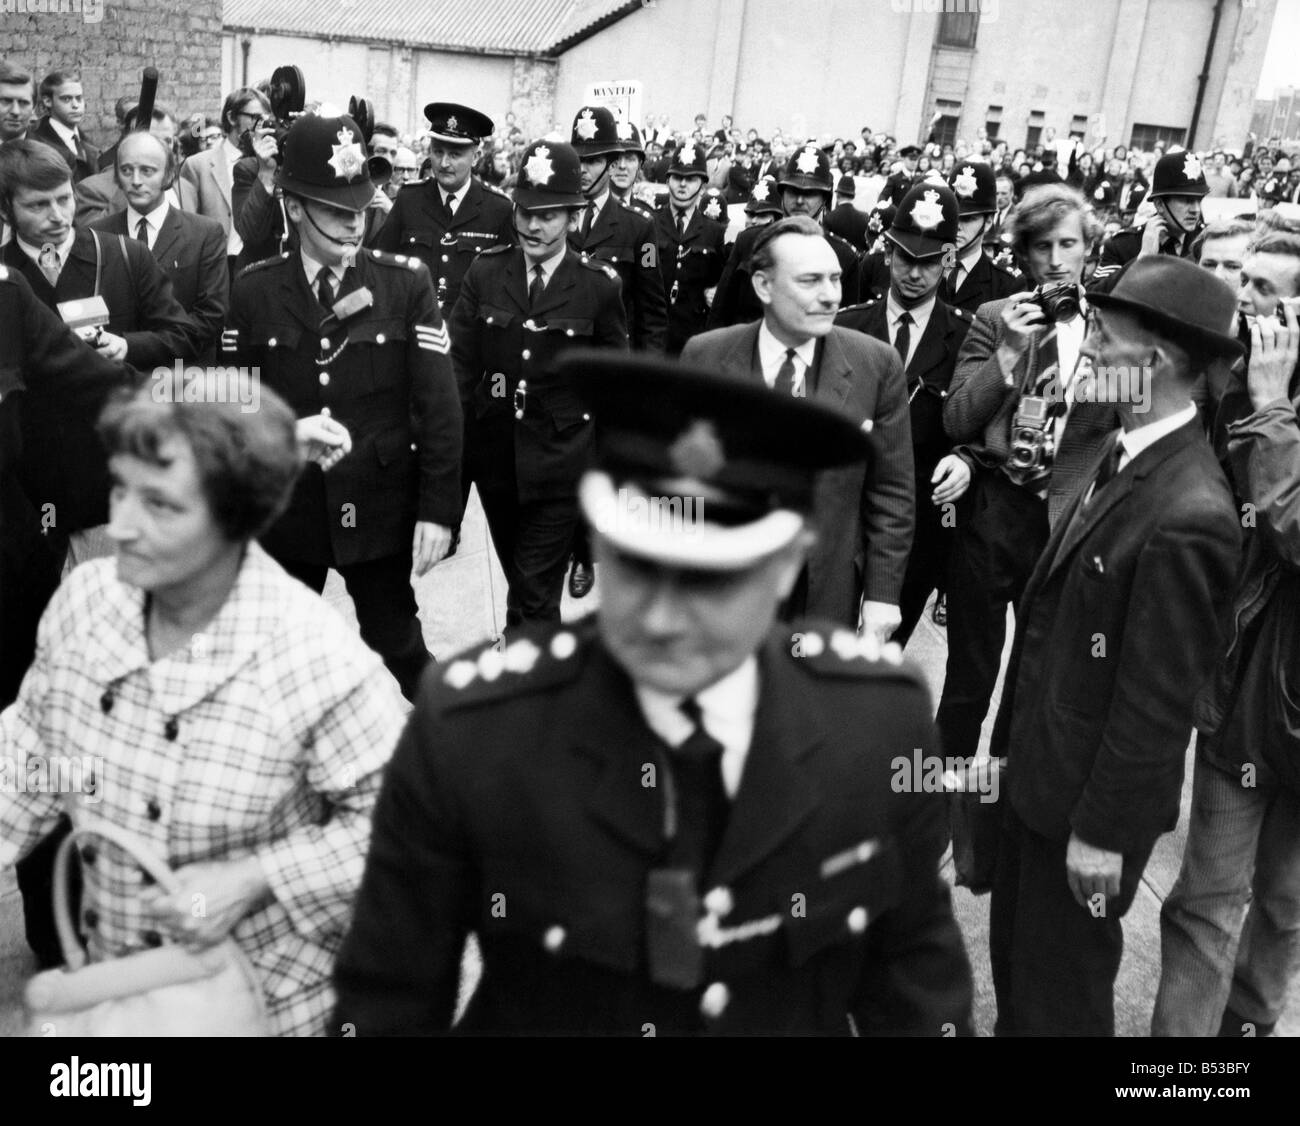 A police escort surrounds controversial Tory candidate Enoch Powell when he arrived to make an election speech at Wembley, Middlesex. ;June 1970 ;P018745 Stock Photo